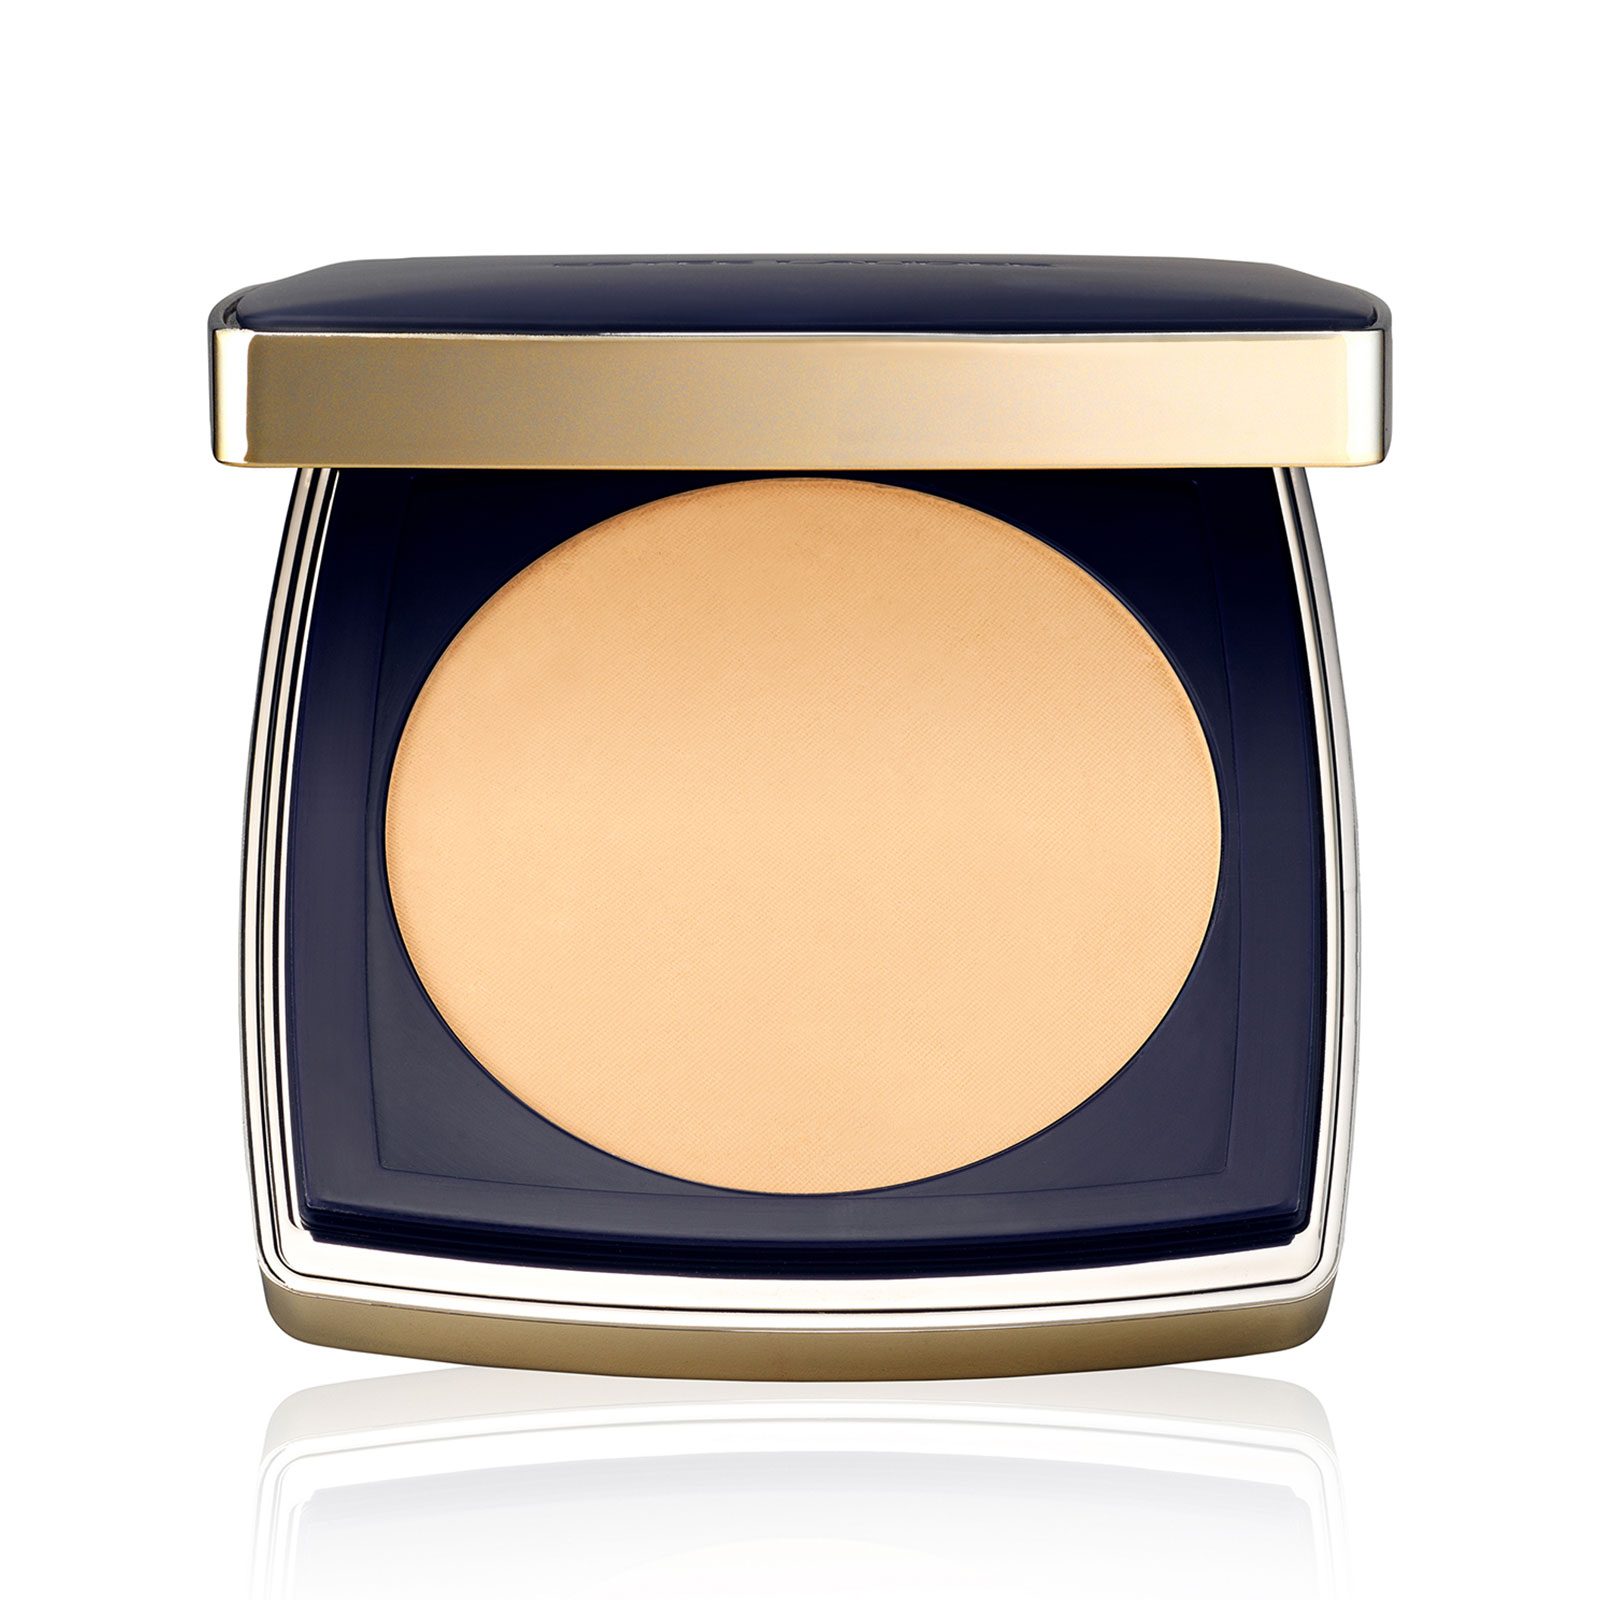 Estee Lauder Double Wear Stay-In-Place Matte Powder Foundation Spf10 12G 2W1.5 Natural Suede